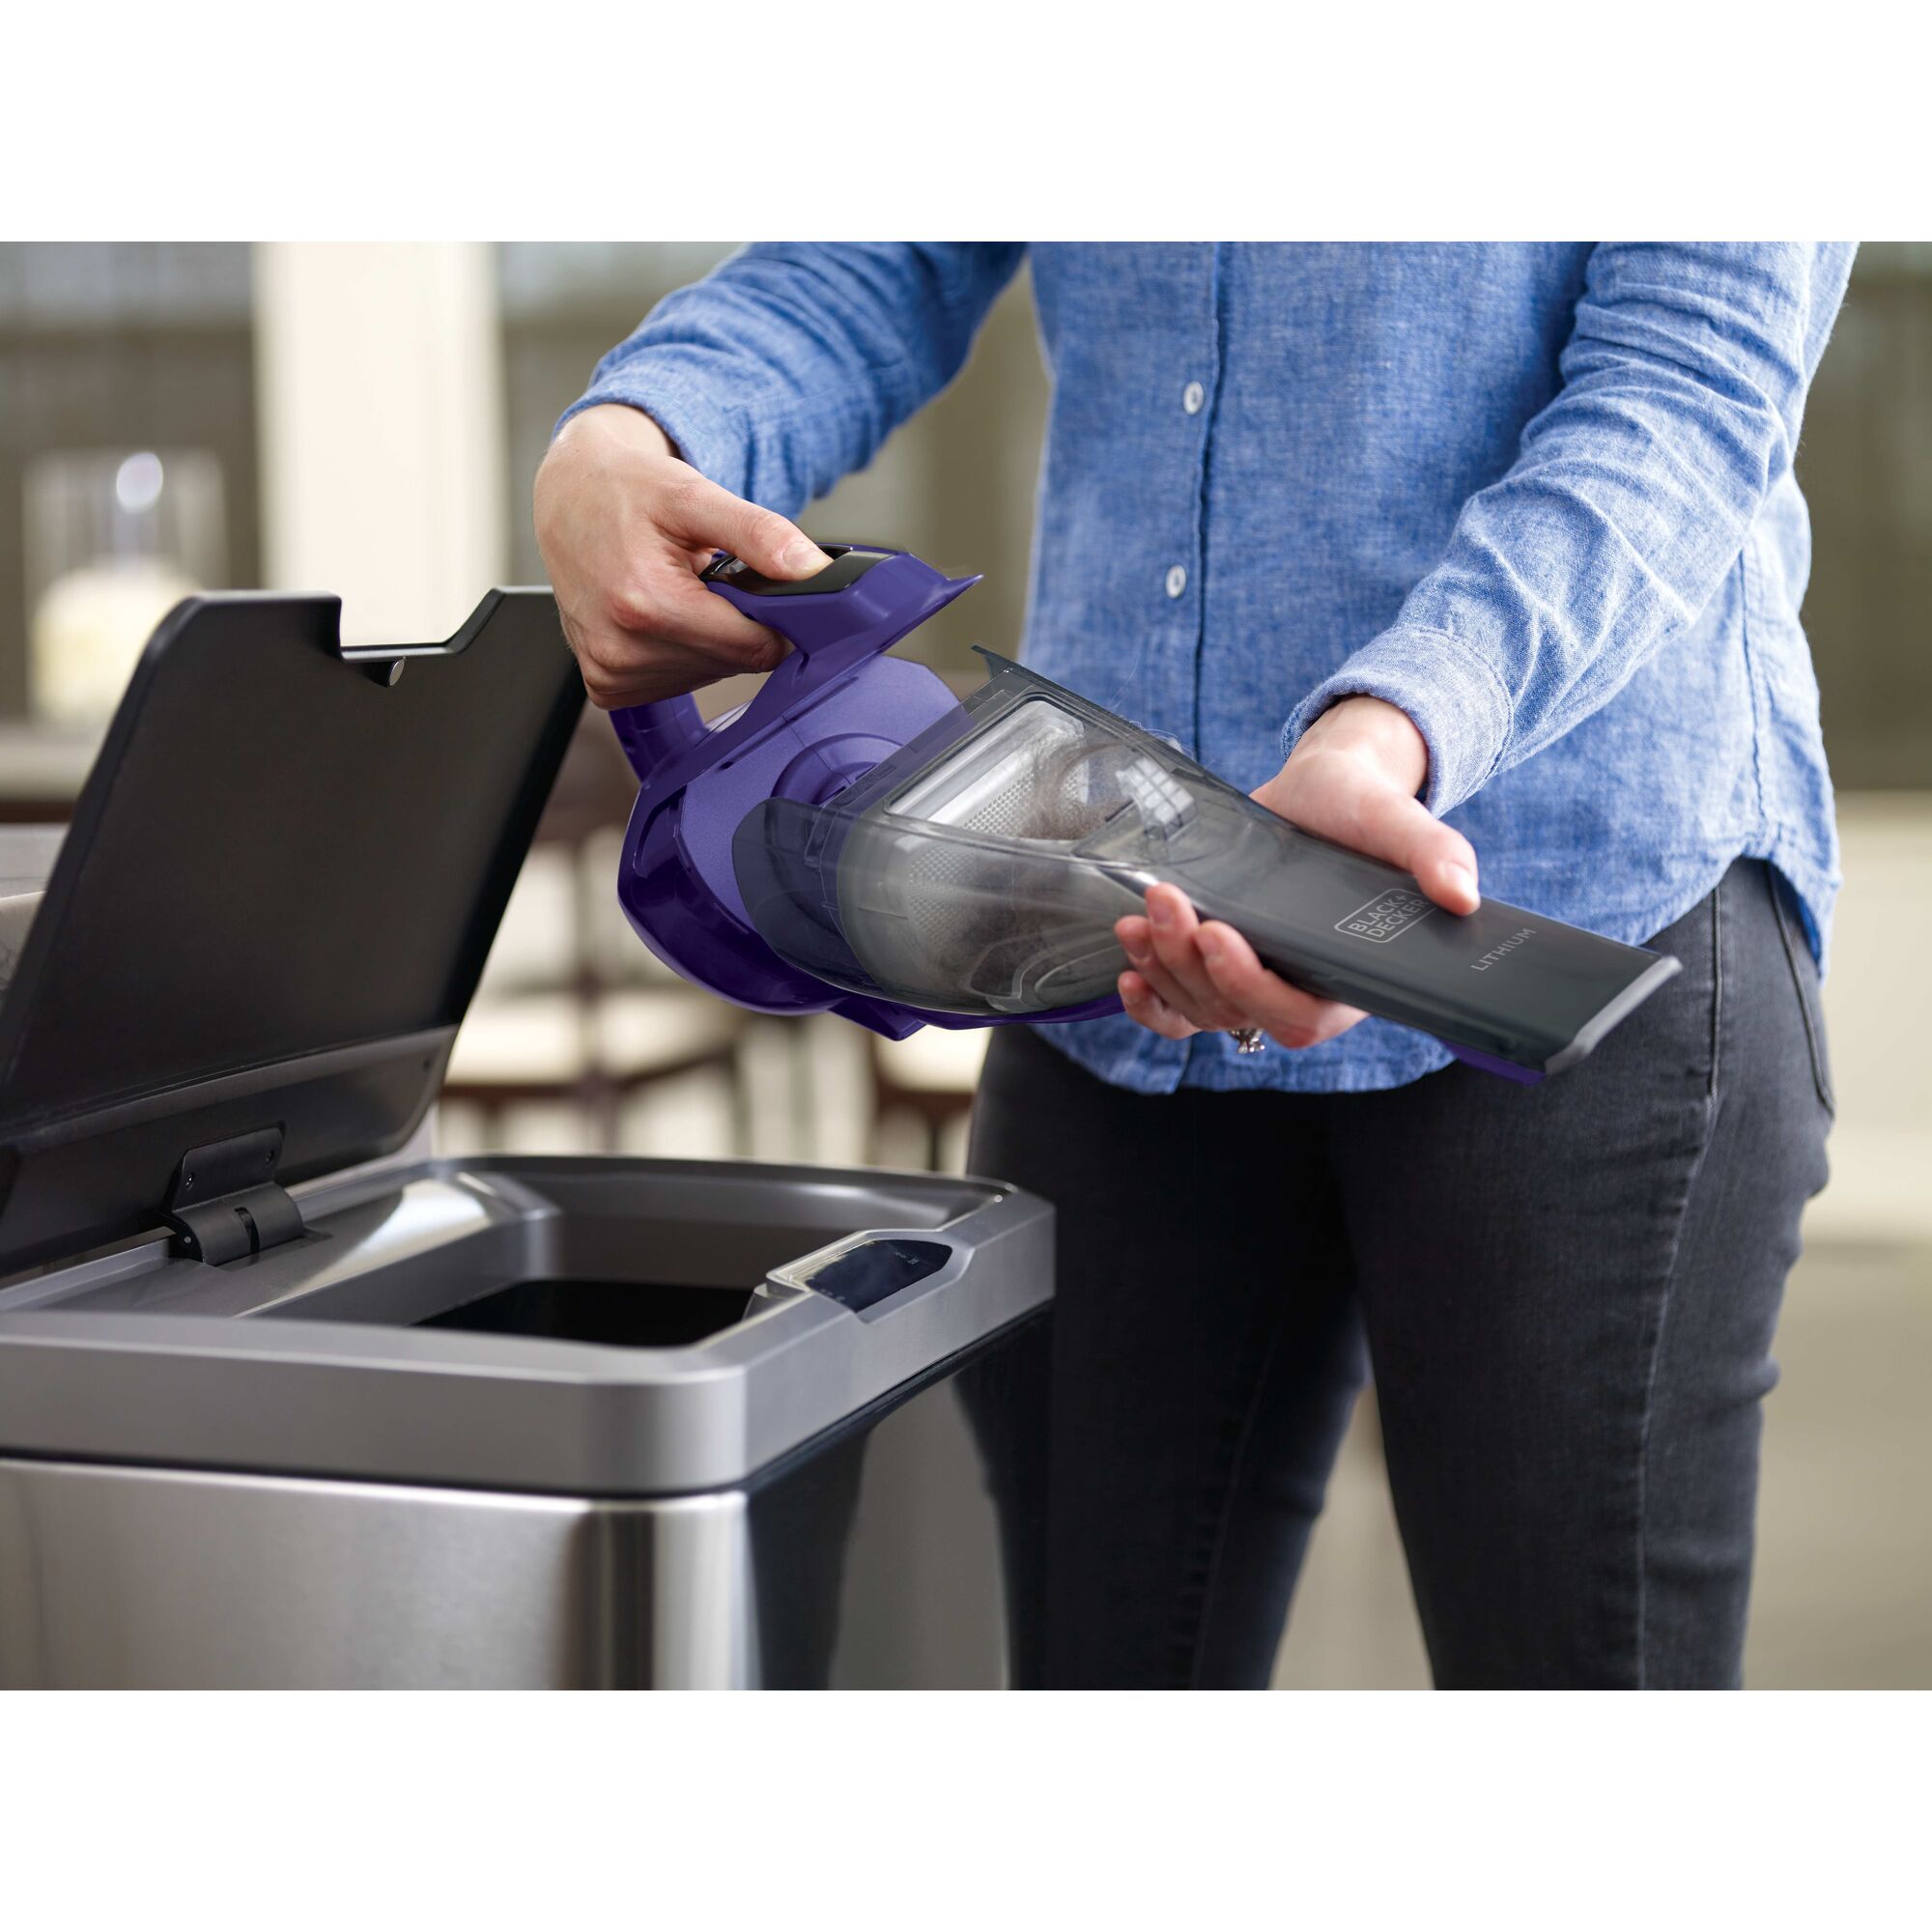 Easily empty the dustbin feature of Dustbuster advanced clean pet cordless hand vacuum.